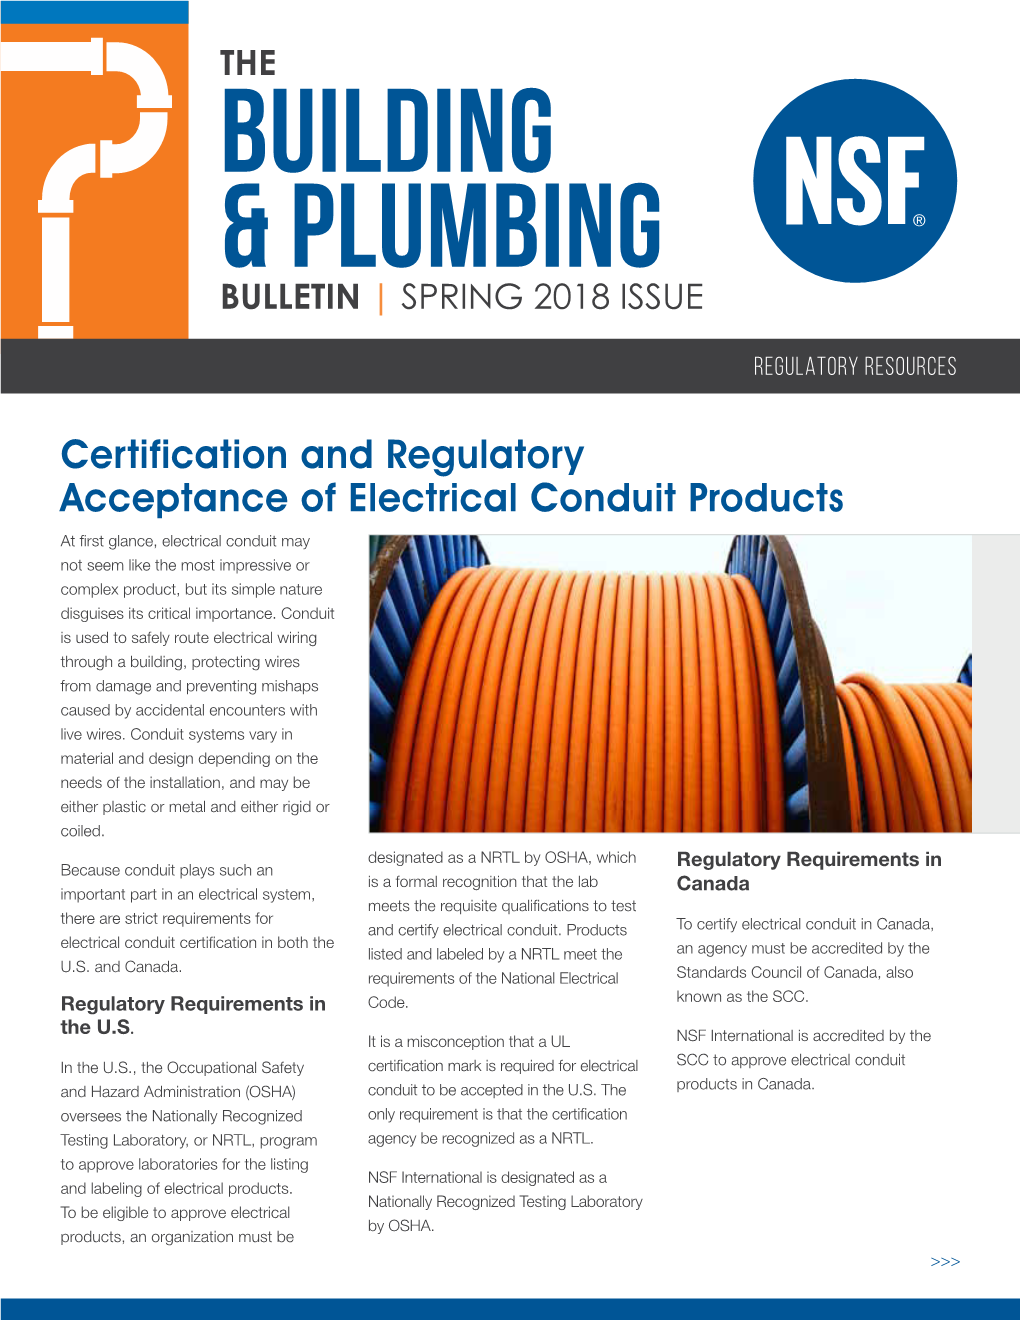 Certification and Regulatory Acceptance of Electrical Conduit